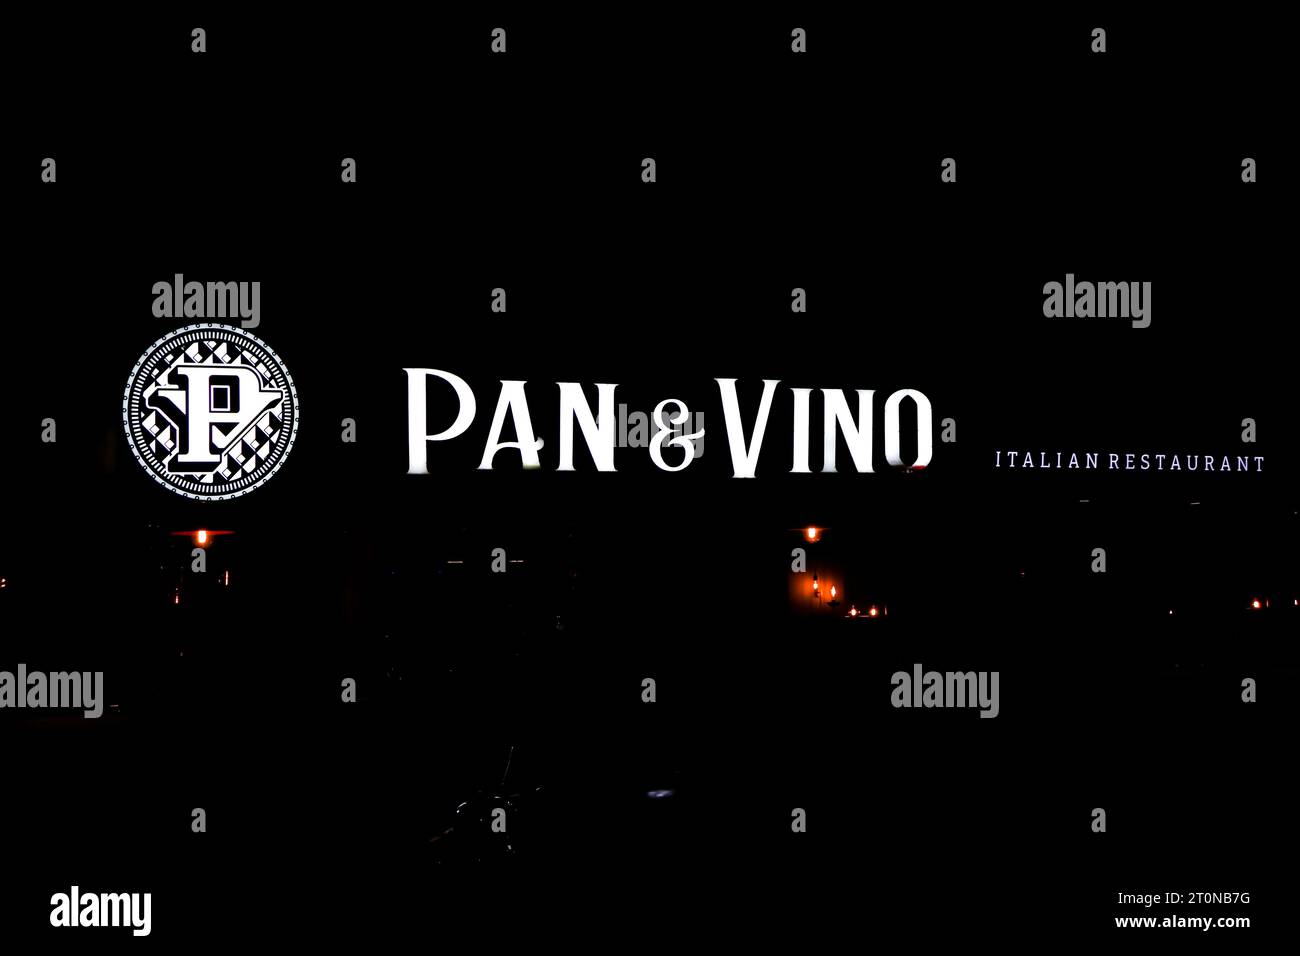 Pan and Vino Italian Restaurant front sign lit during the night Stock Photo